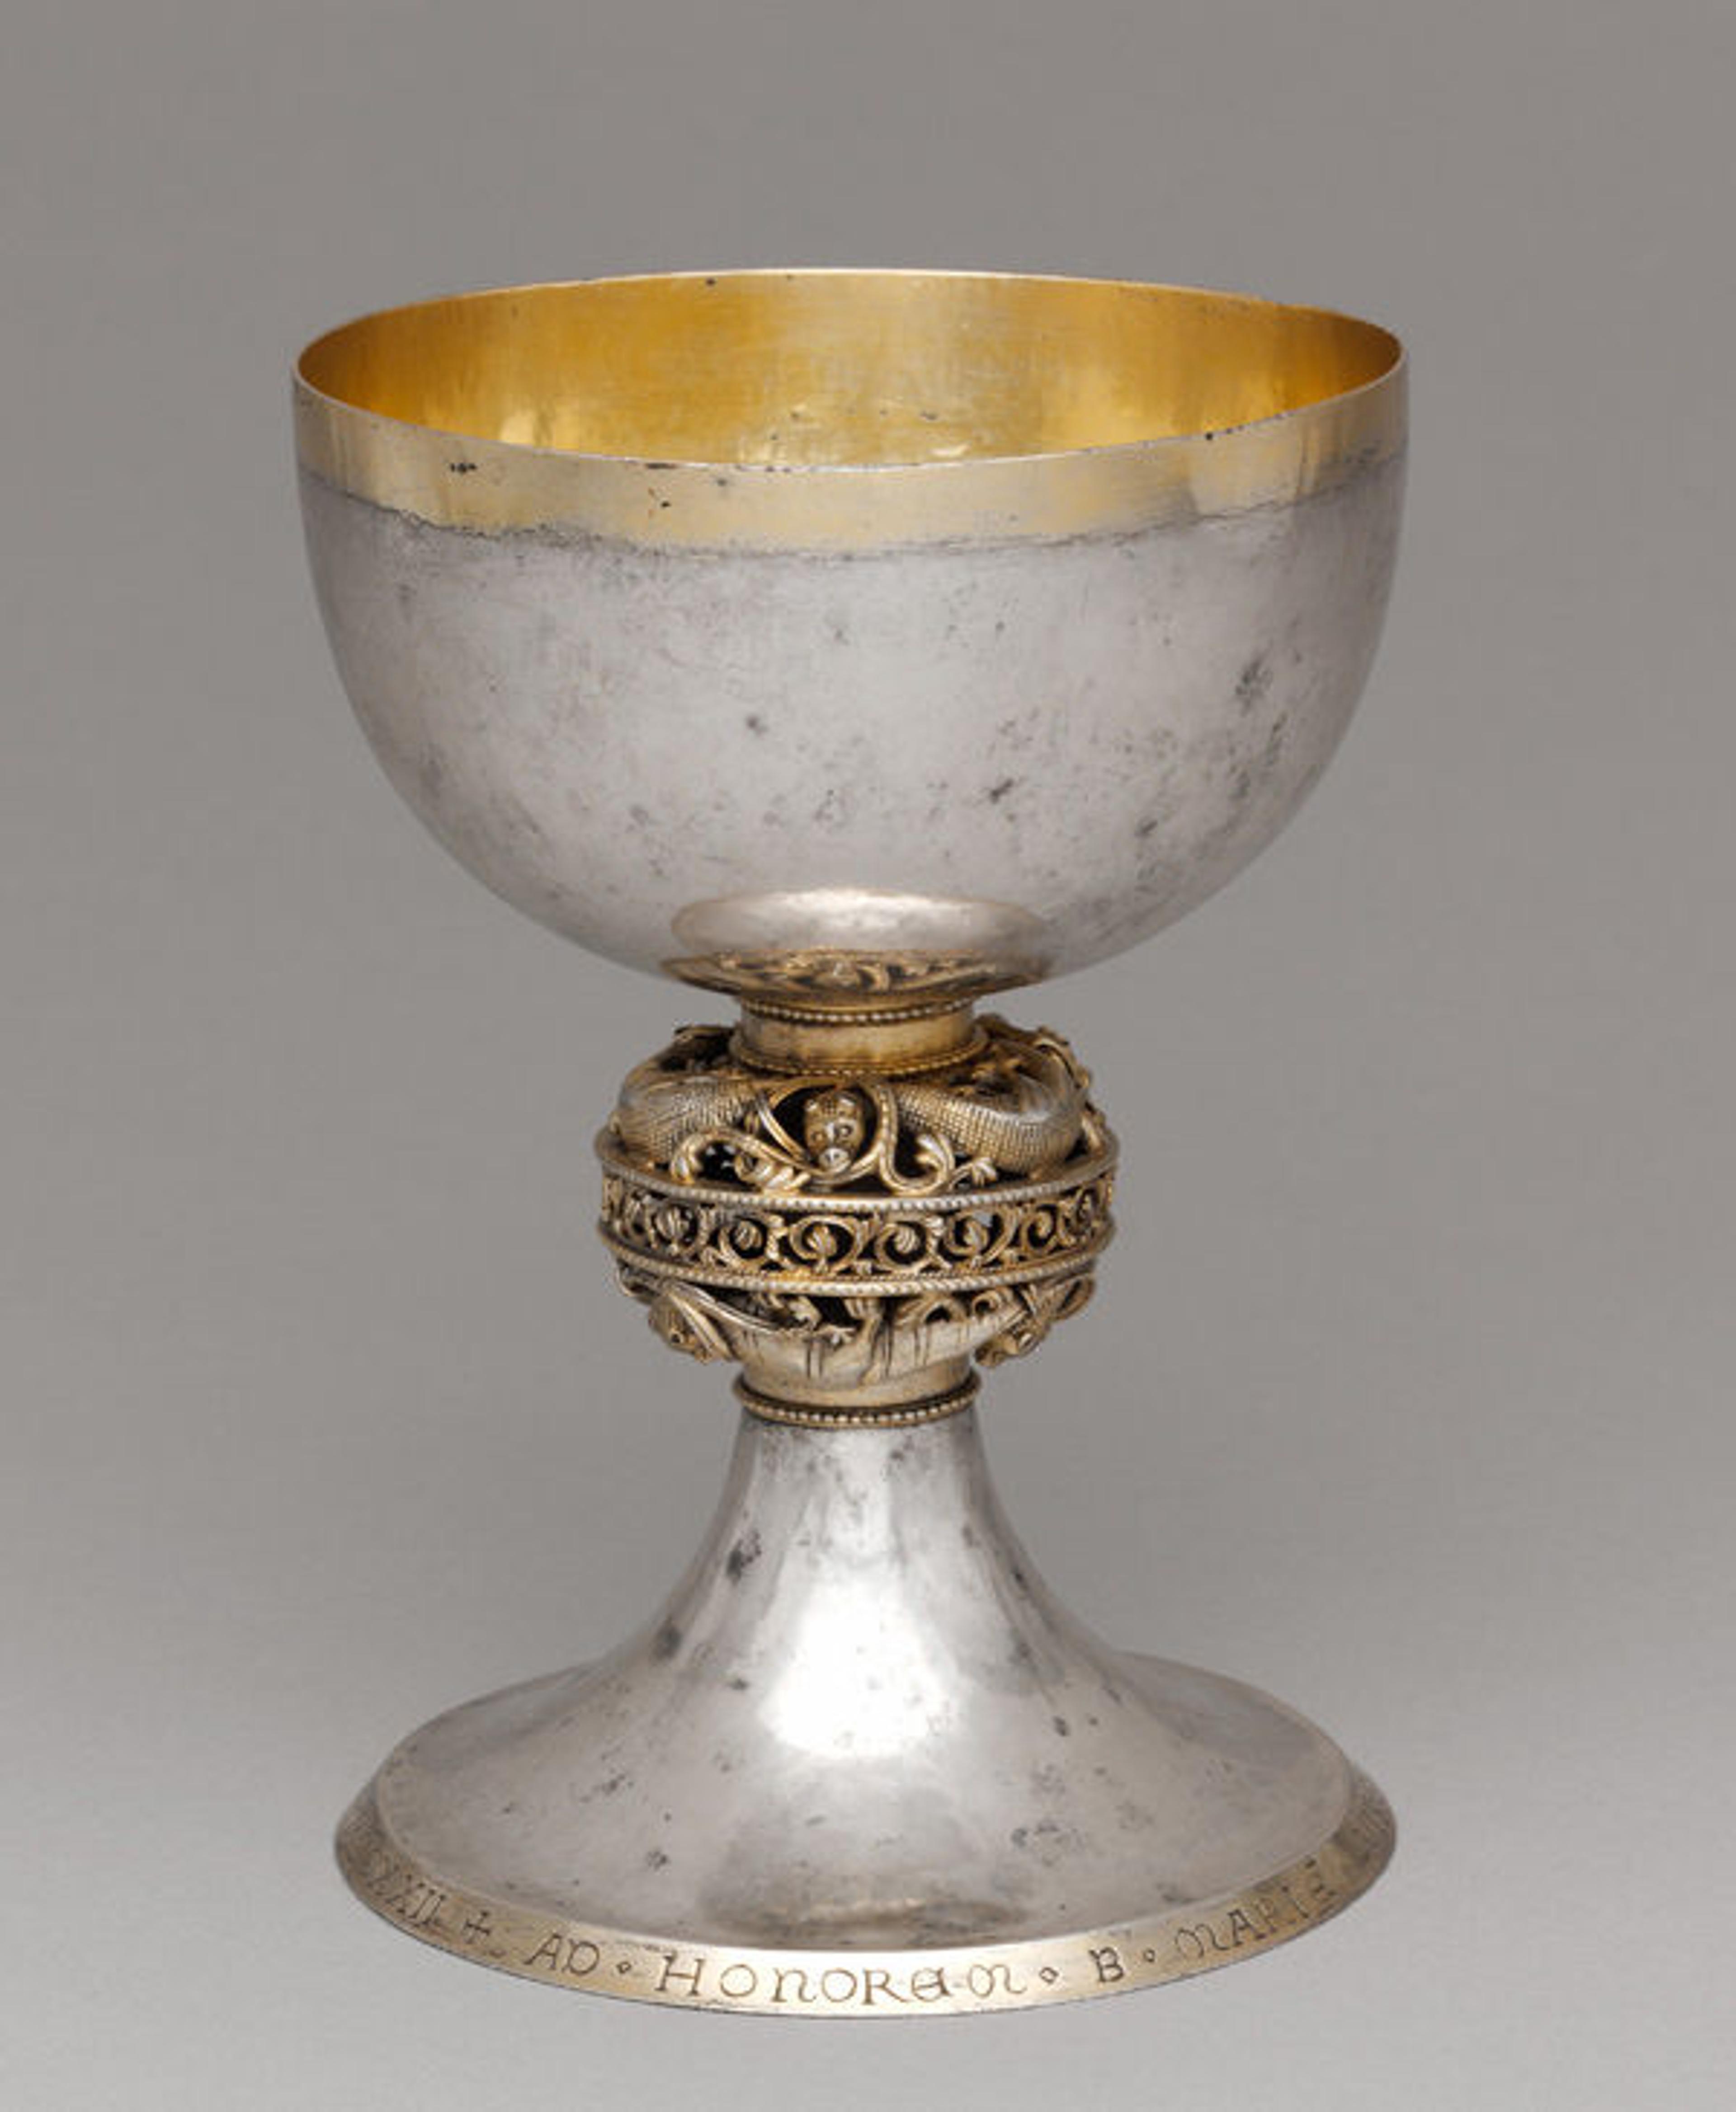 Brother Bertinus. Chalice, 1222. Made in possibly Meuse Valley, Northern Europe. Silver and silver gilt; Overall: 7 1/2 x 5 3/8 in. (19.1 x 13.7 cm). The Metropolitan Museum of Art, New York, The Cloisters Collection, 1947 (47.101.30)